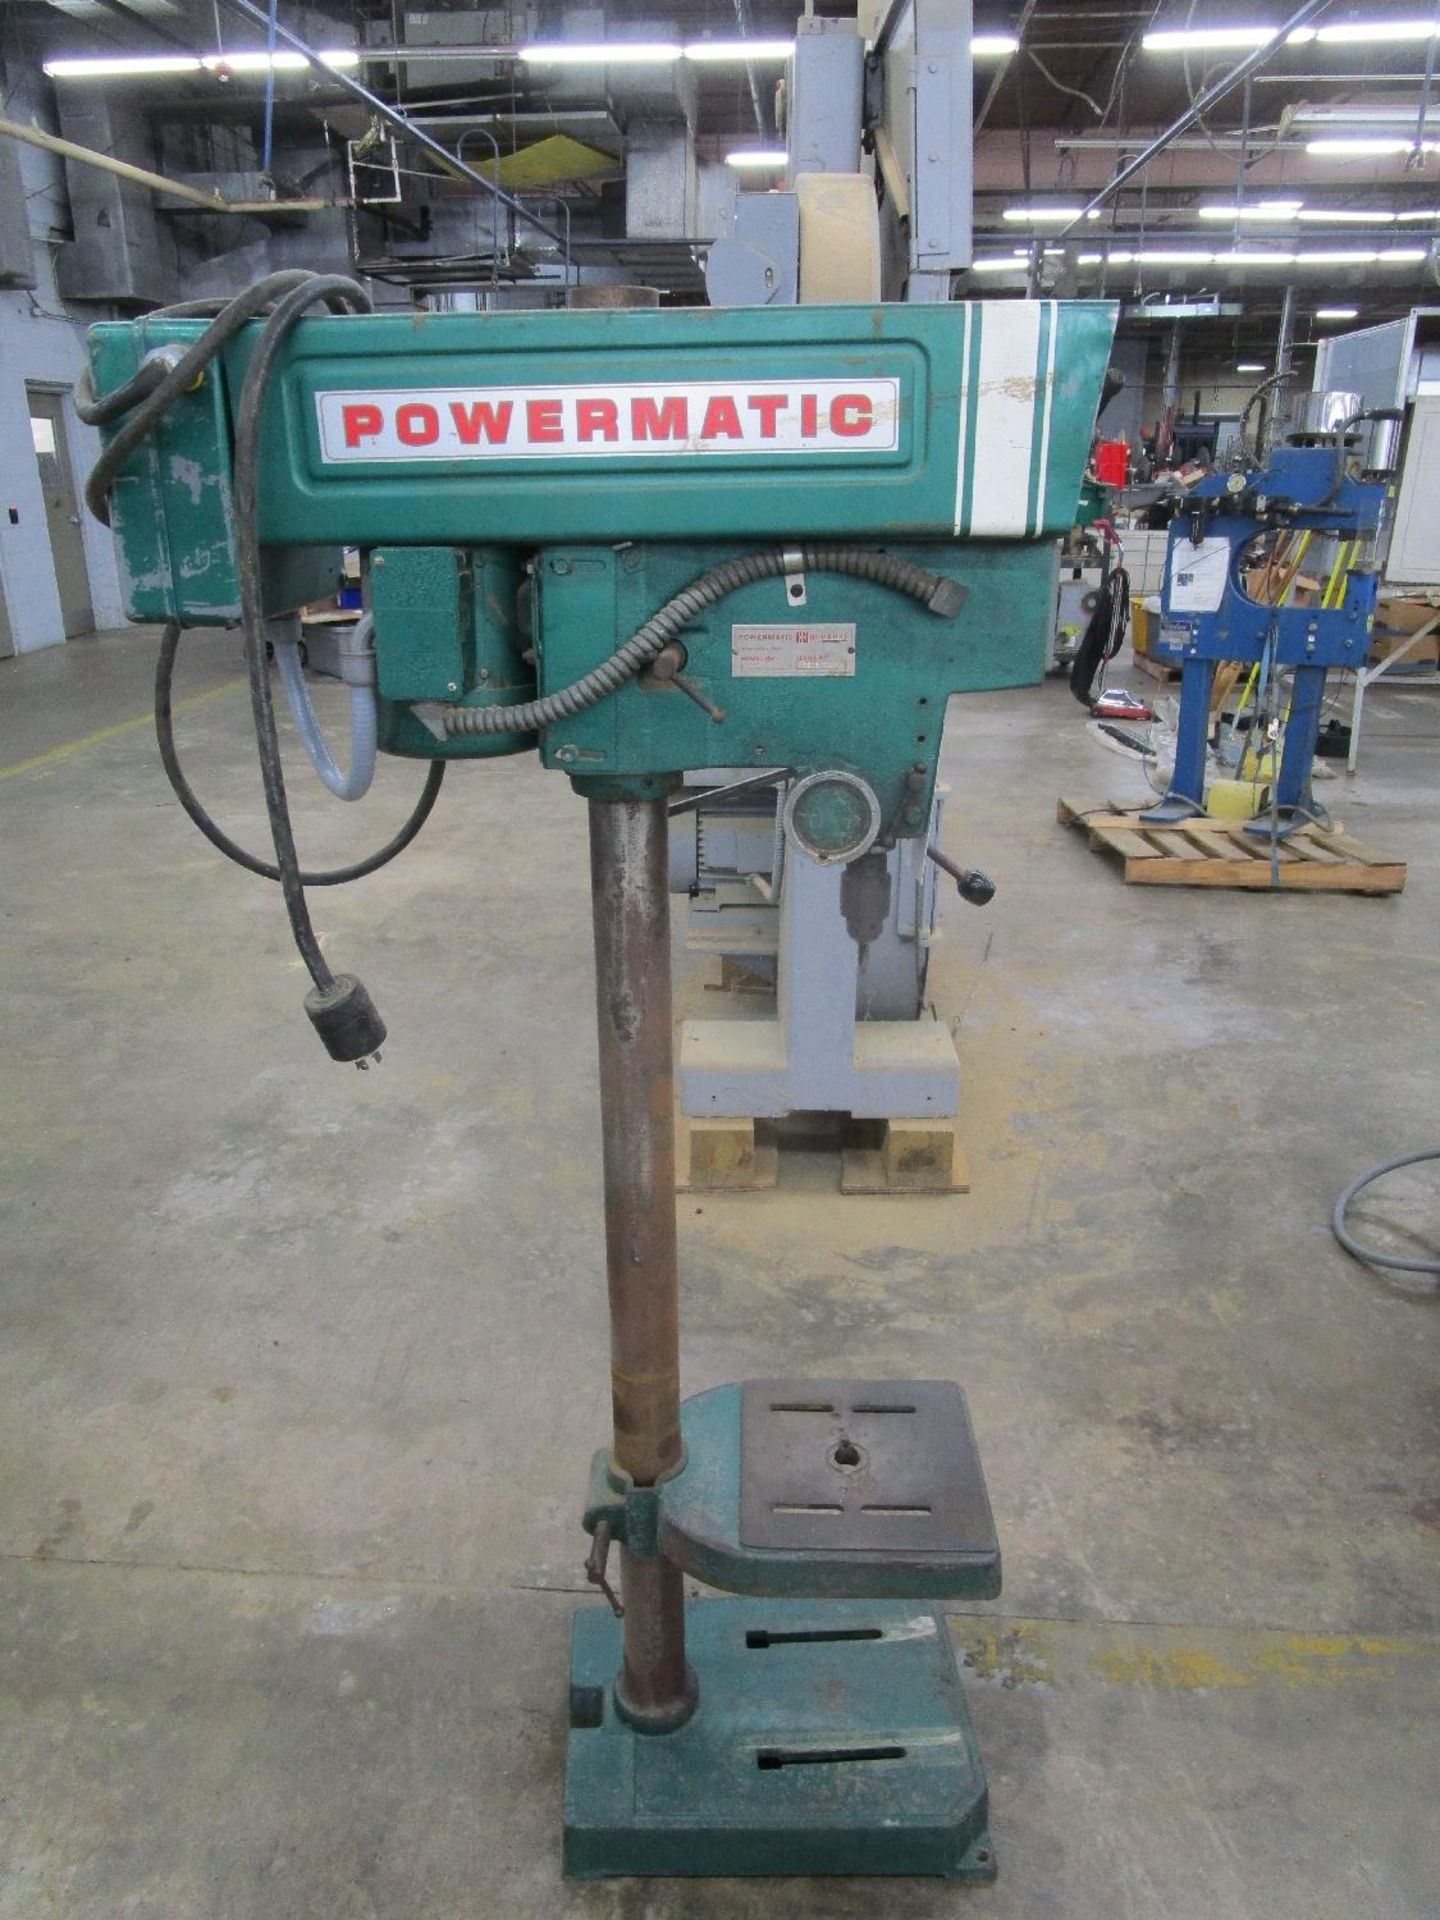 Powermatic 1150A 15" Floor-Standing Drill Press - Image 2 of 2